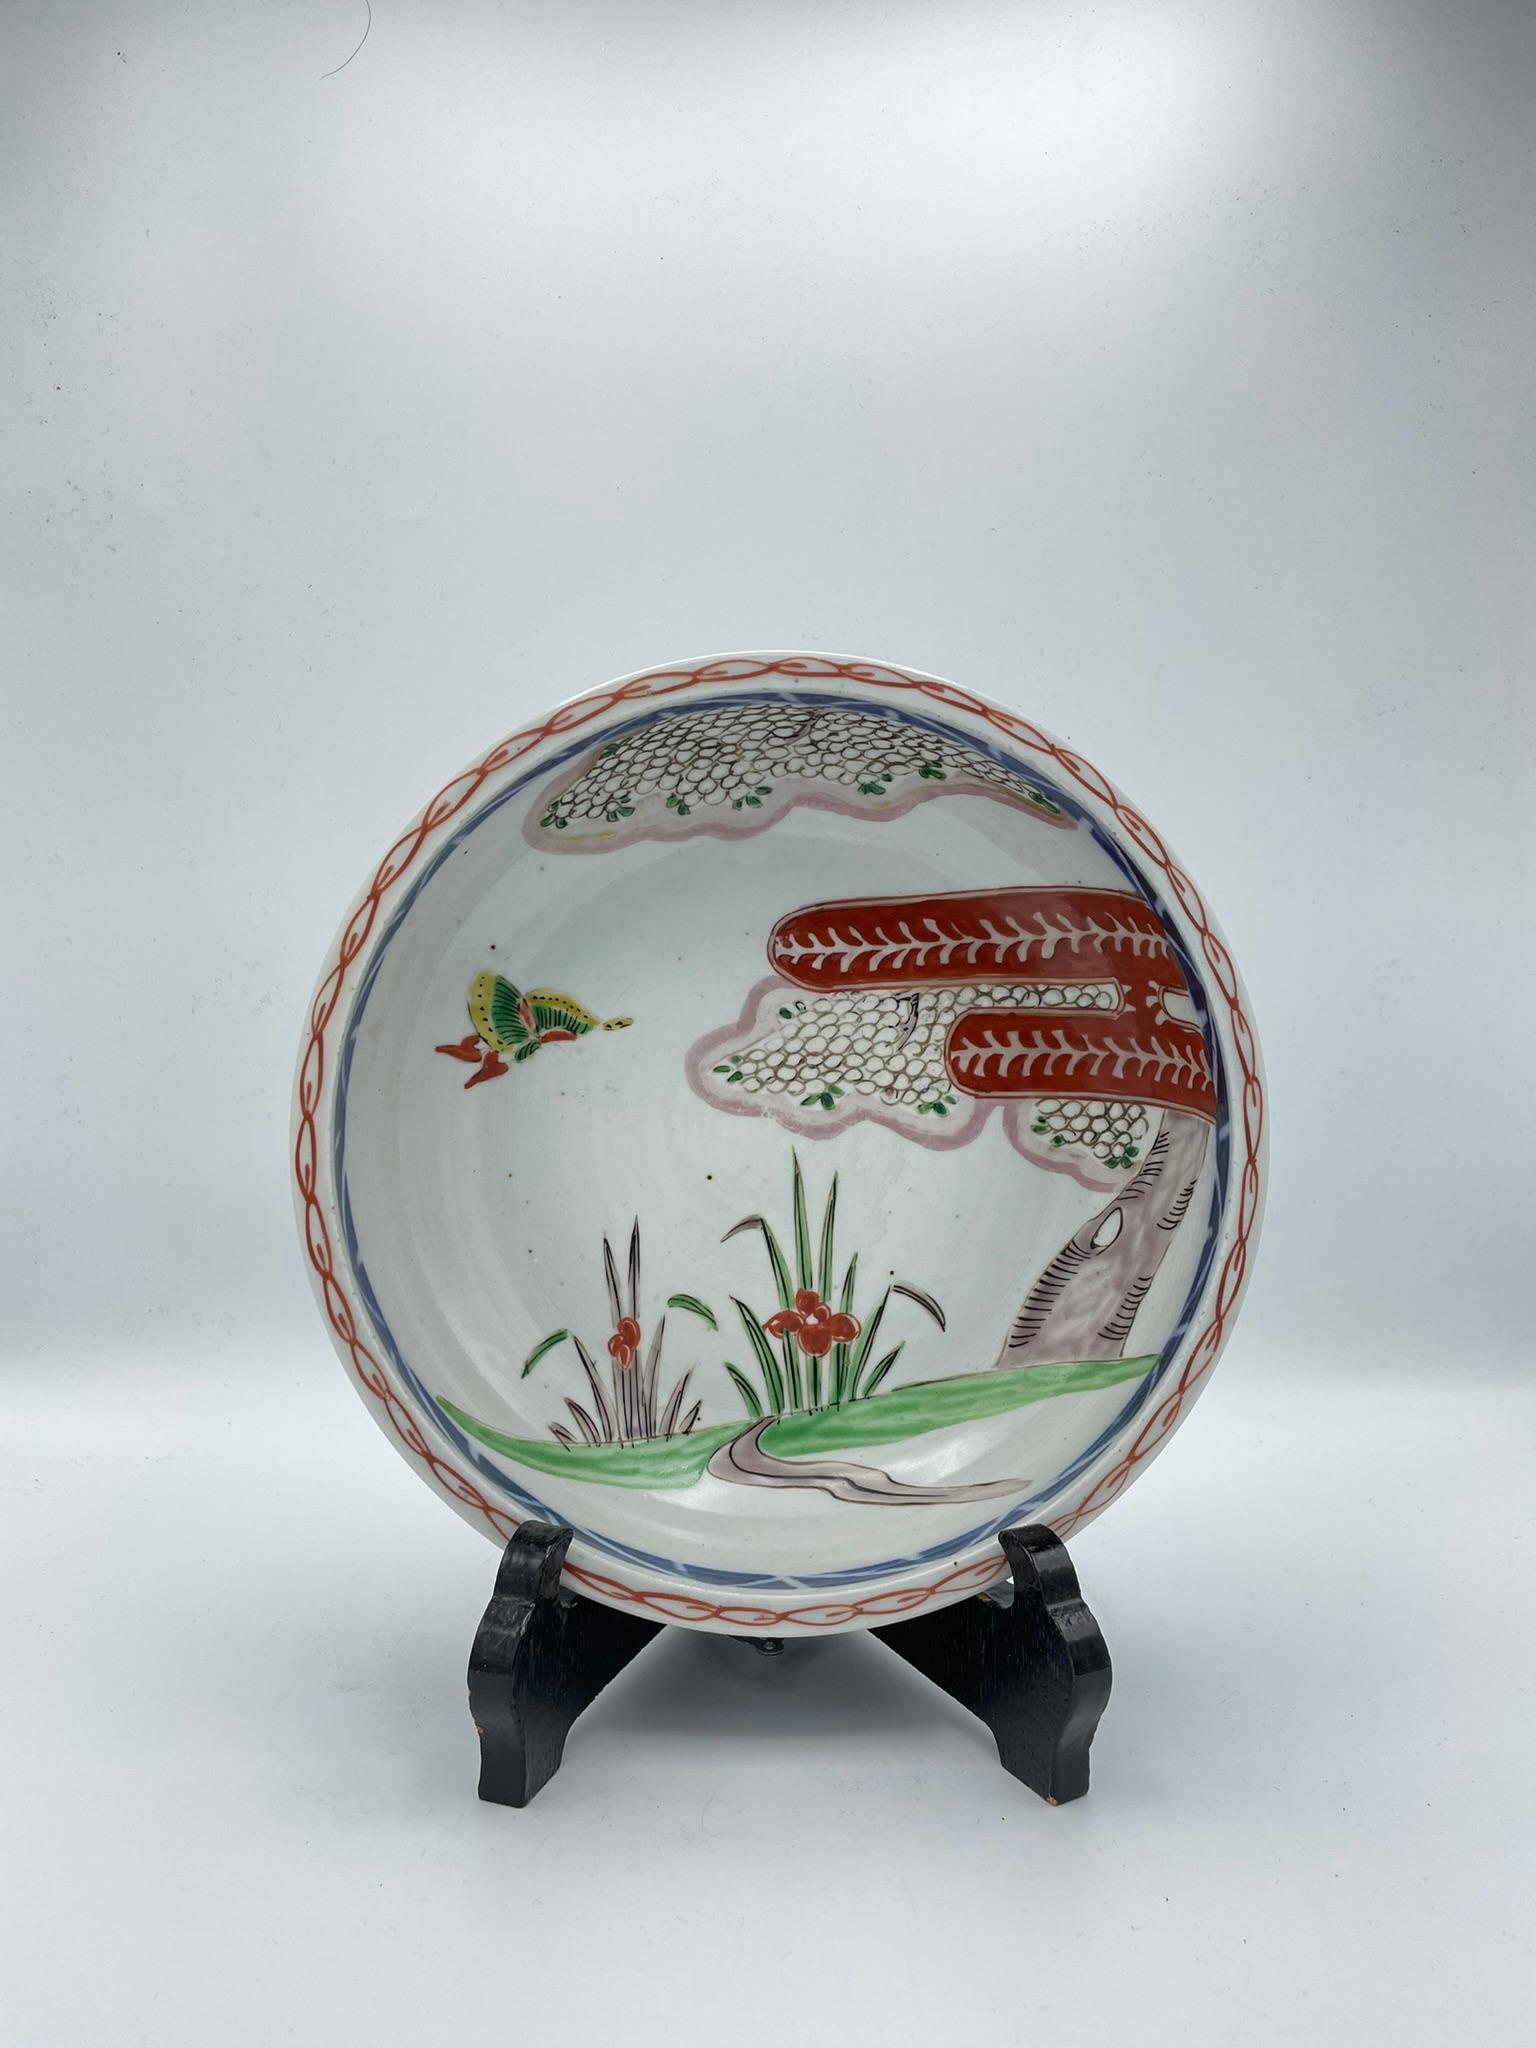 This is a serving bowl made around 1868- 1912s (in Meiji era). It is made with style Imari-yaki (Imari ware). 
You can use as a serving bowl but also as a decoration.

Dimensions:
21.5cm × 21.5cm × H 6.3 cm


Imari-yaki (Imari ware) was